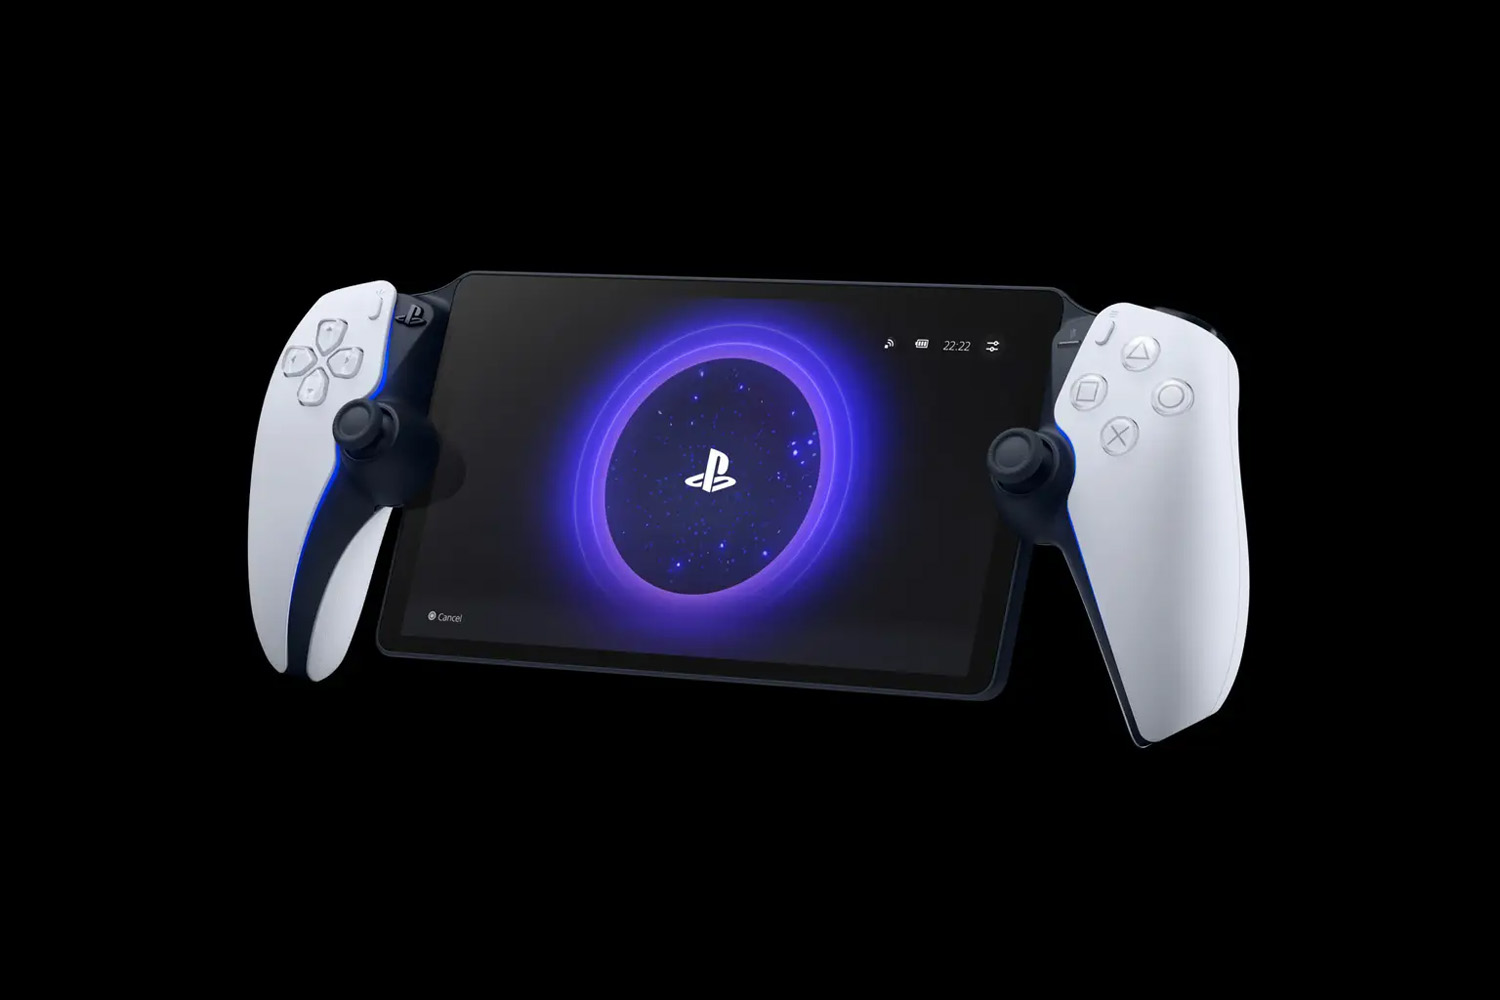 PS5 Pro to be Released Soon, Check Out the Specifications Here!